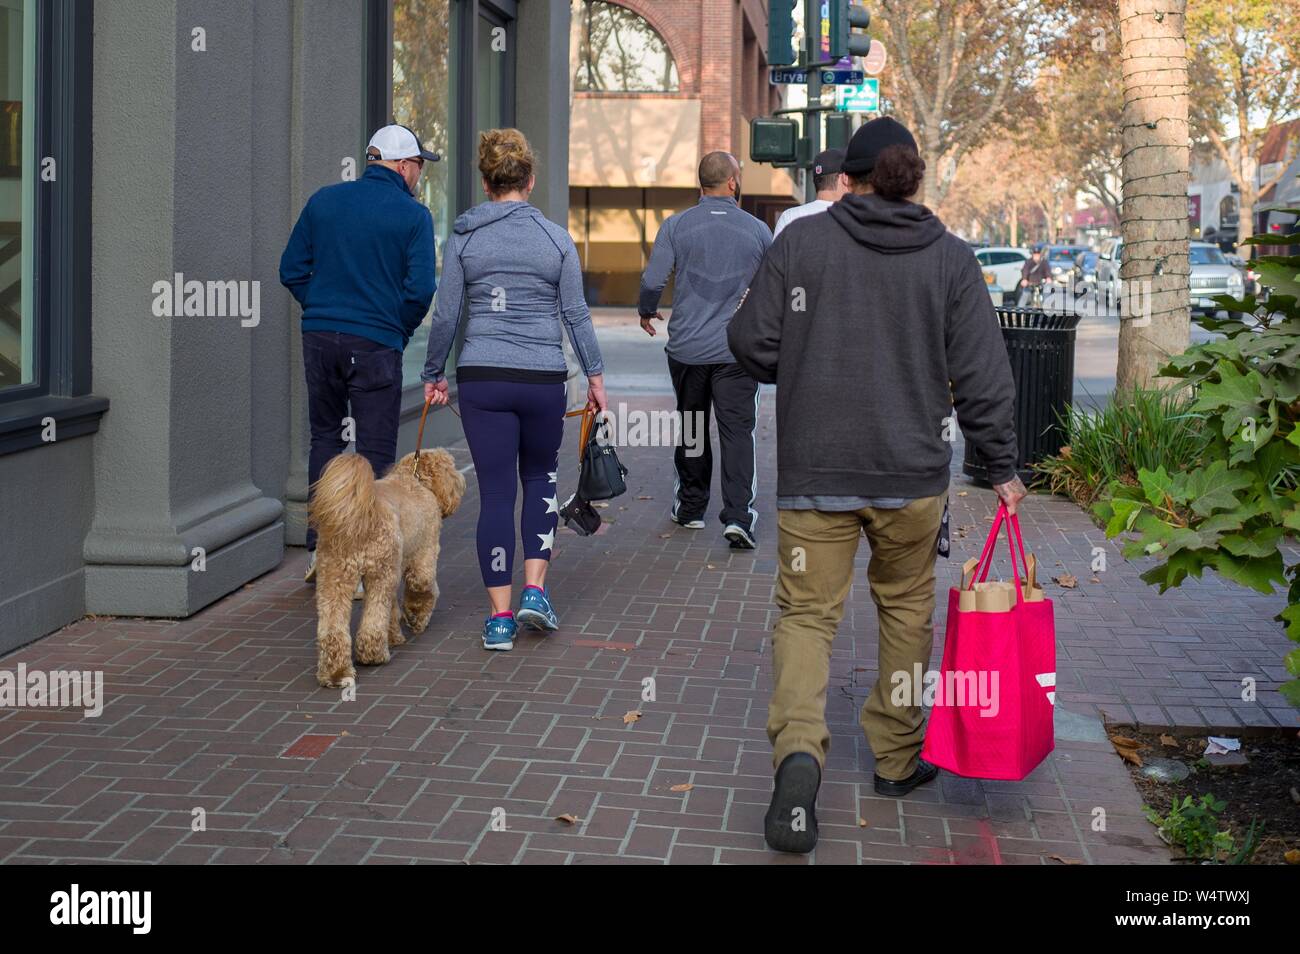 A gig economy worker walks down University Avenue in the Silicon Valley town of Palo Alto, California, carrying the distinctive red bag of food delivery app service Doordash, with bag containing customer order visible, November 17, 2018. () Stock Photo